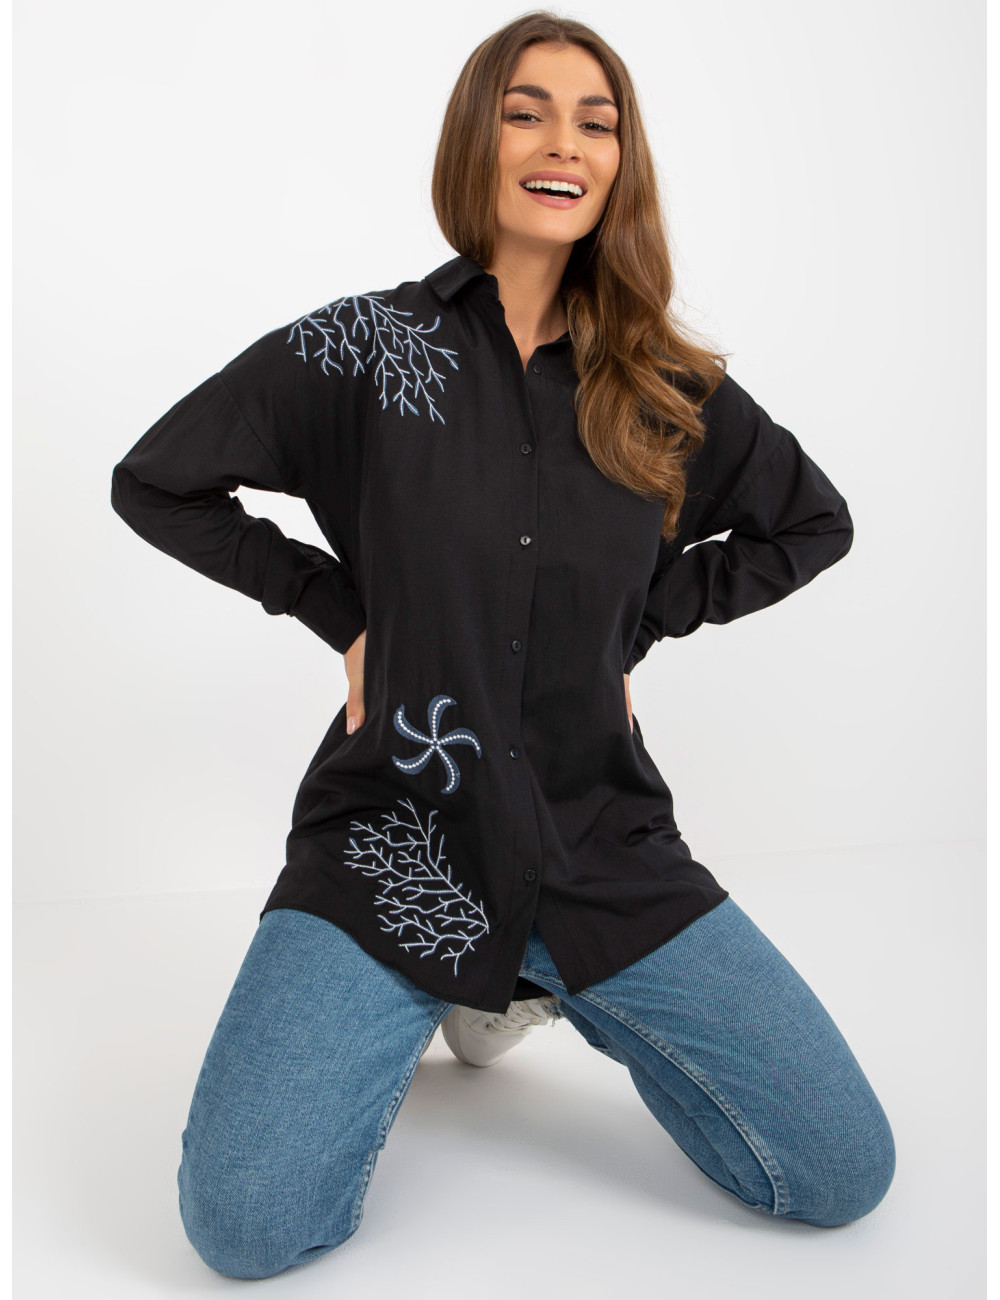 Black cardigan oversized shirt with embroidery 